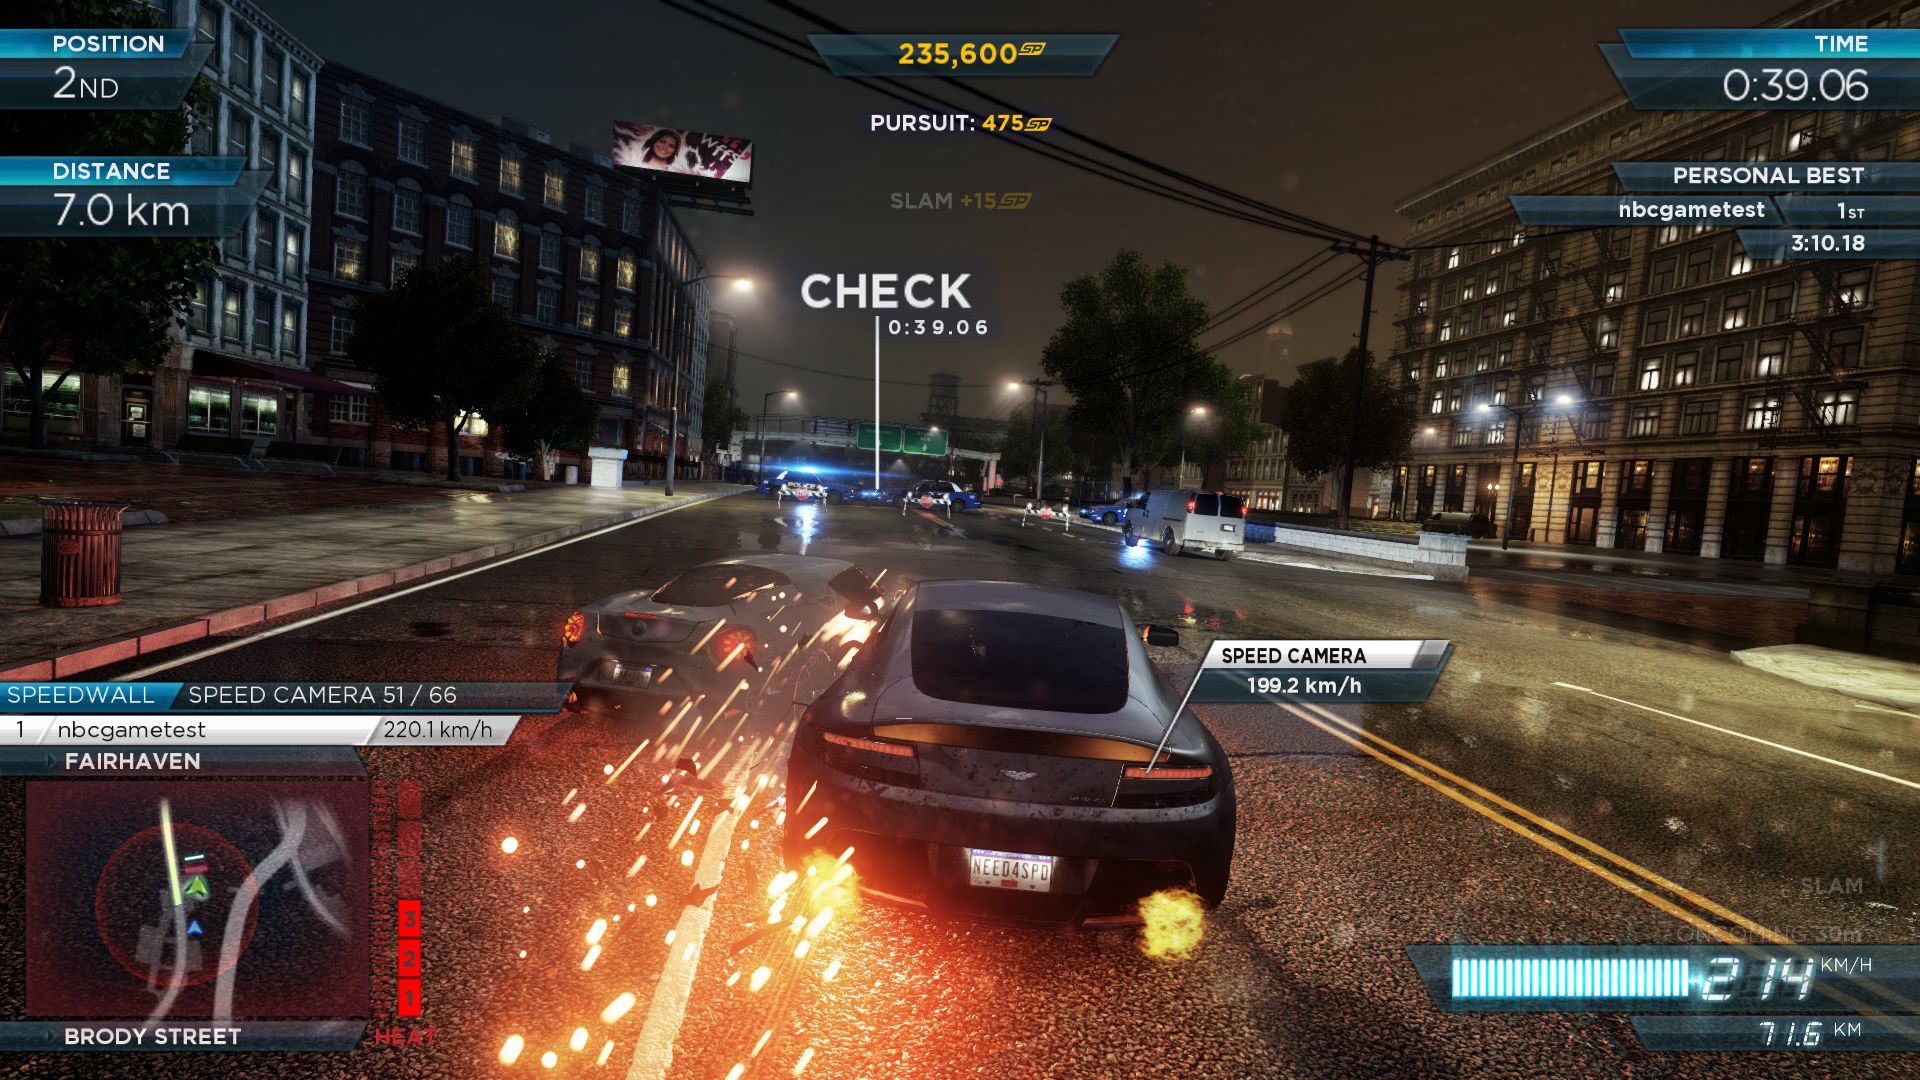 Download Need For Speed Most Wanted Apk And Obb Files لم يسبق له